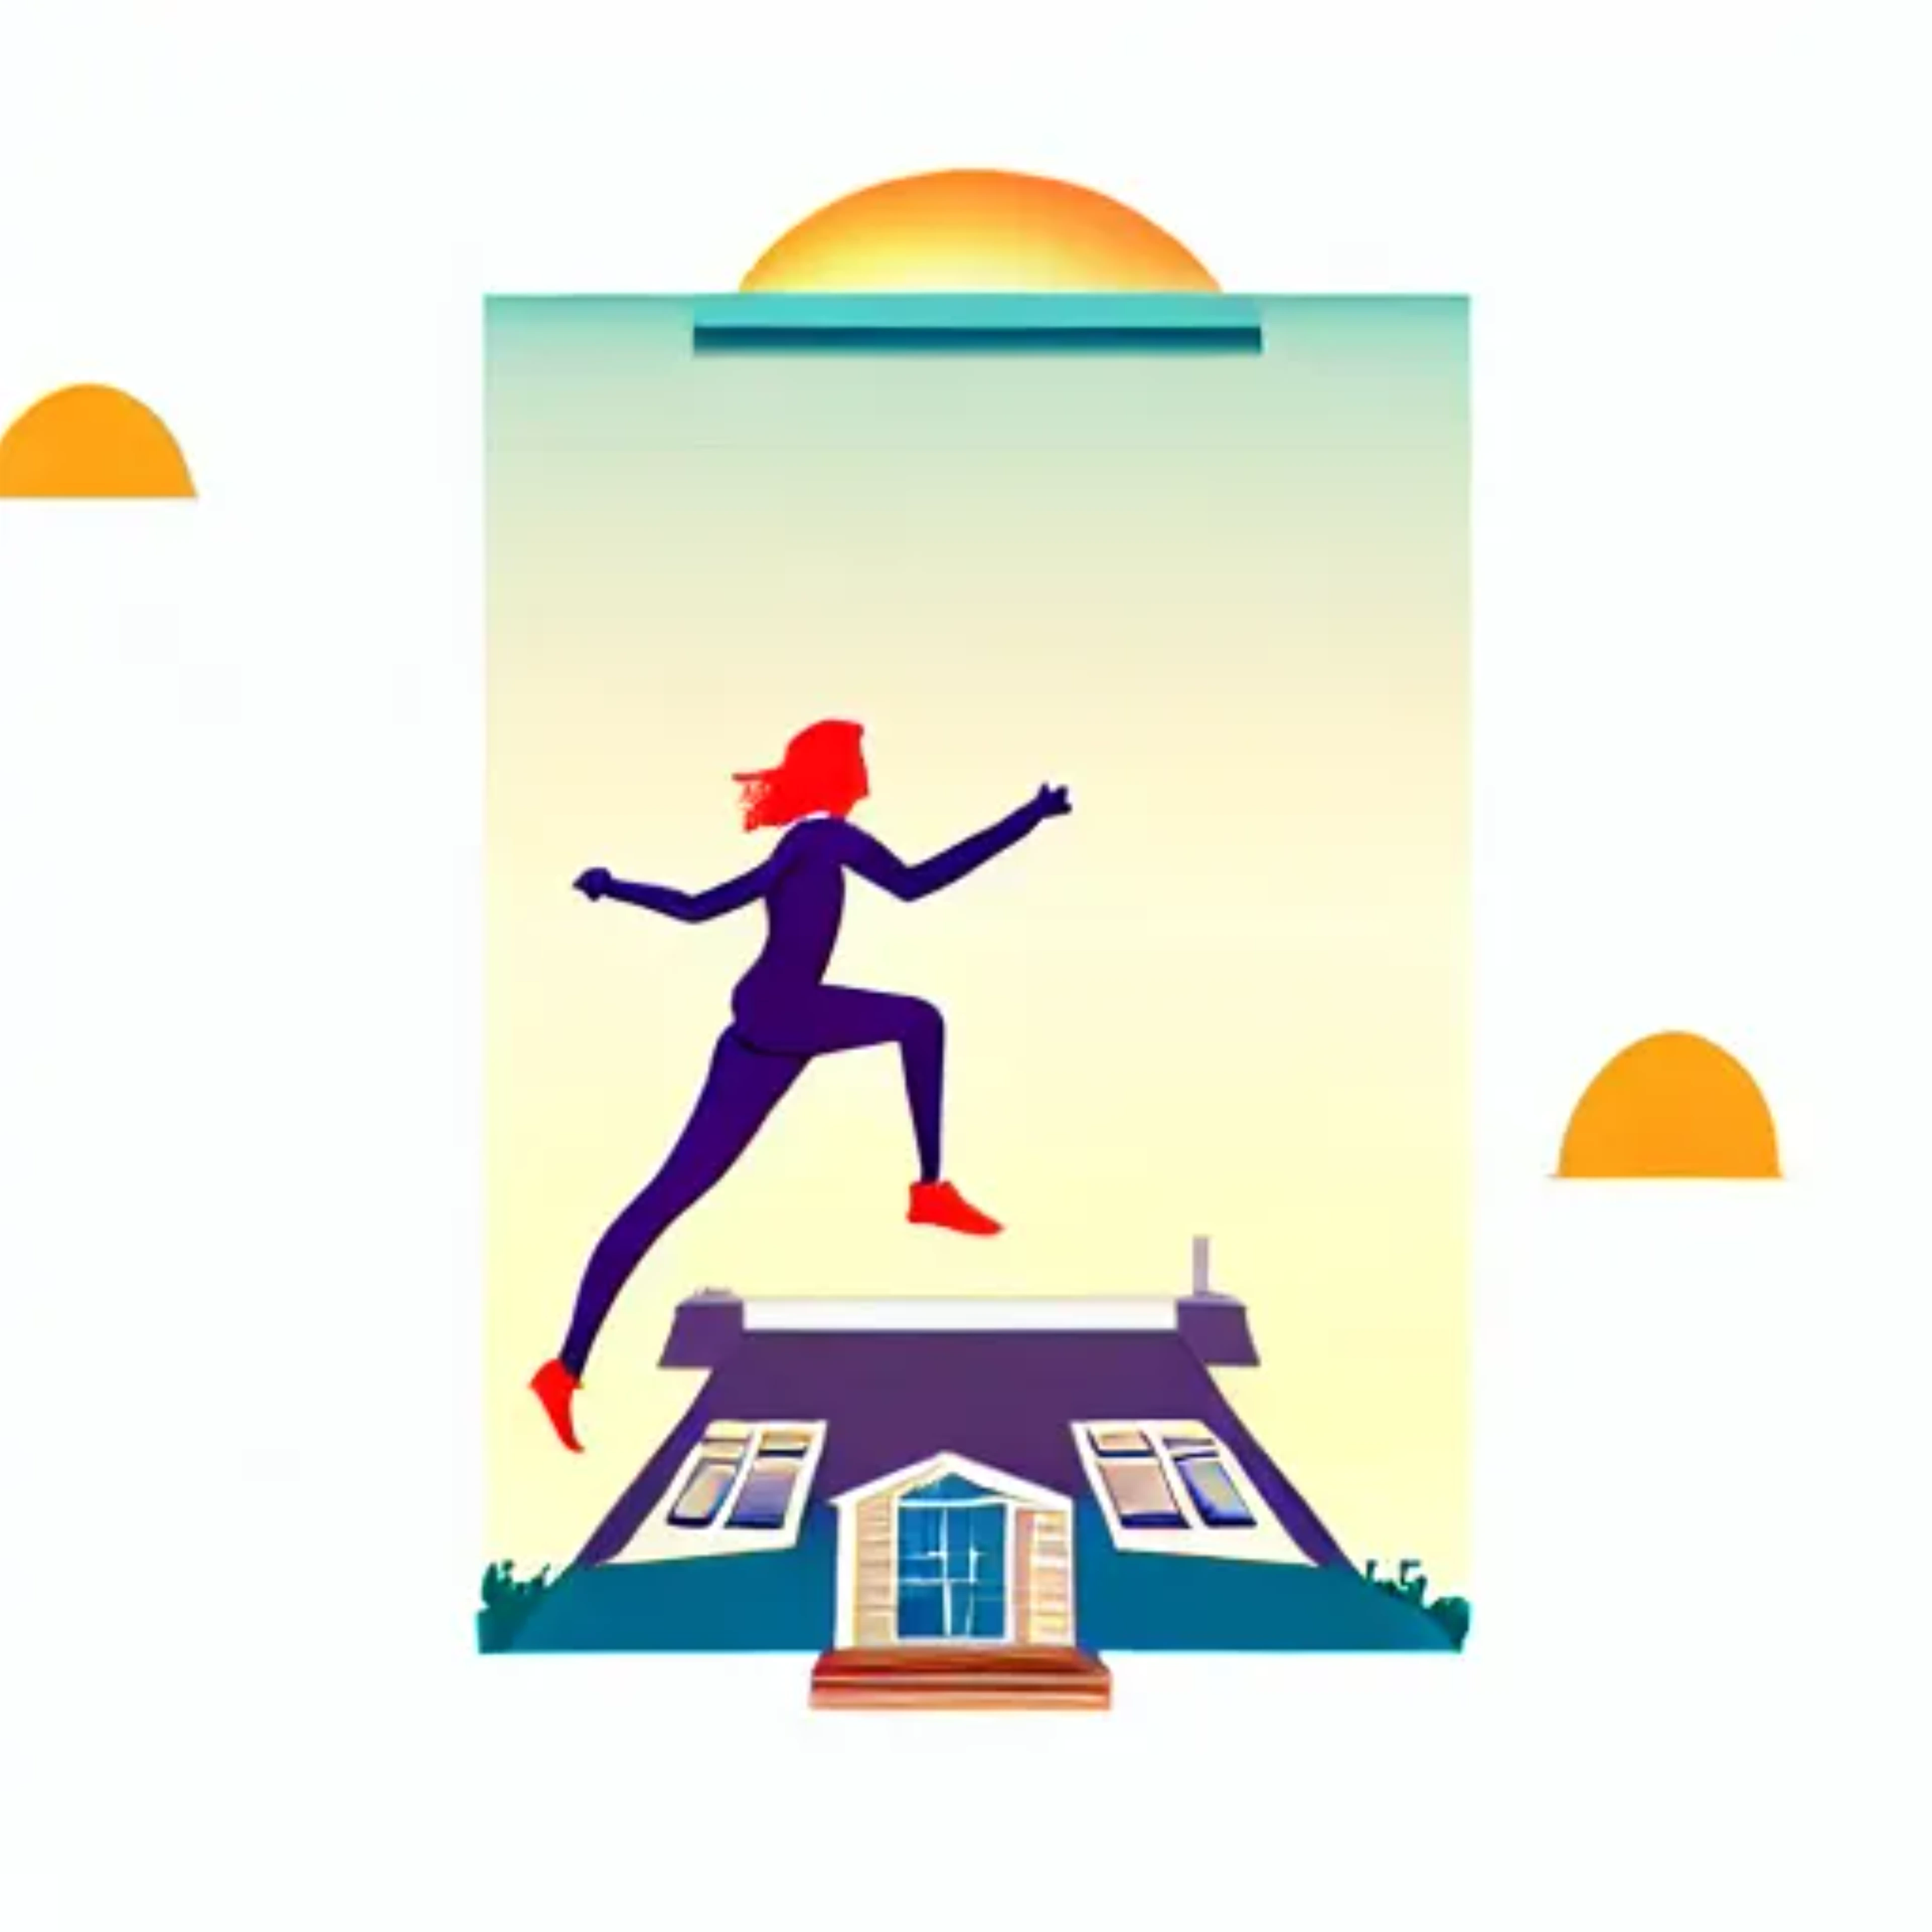 Abstract image of a runner jumping over a house with a yellow and green gradient background